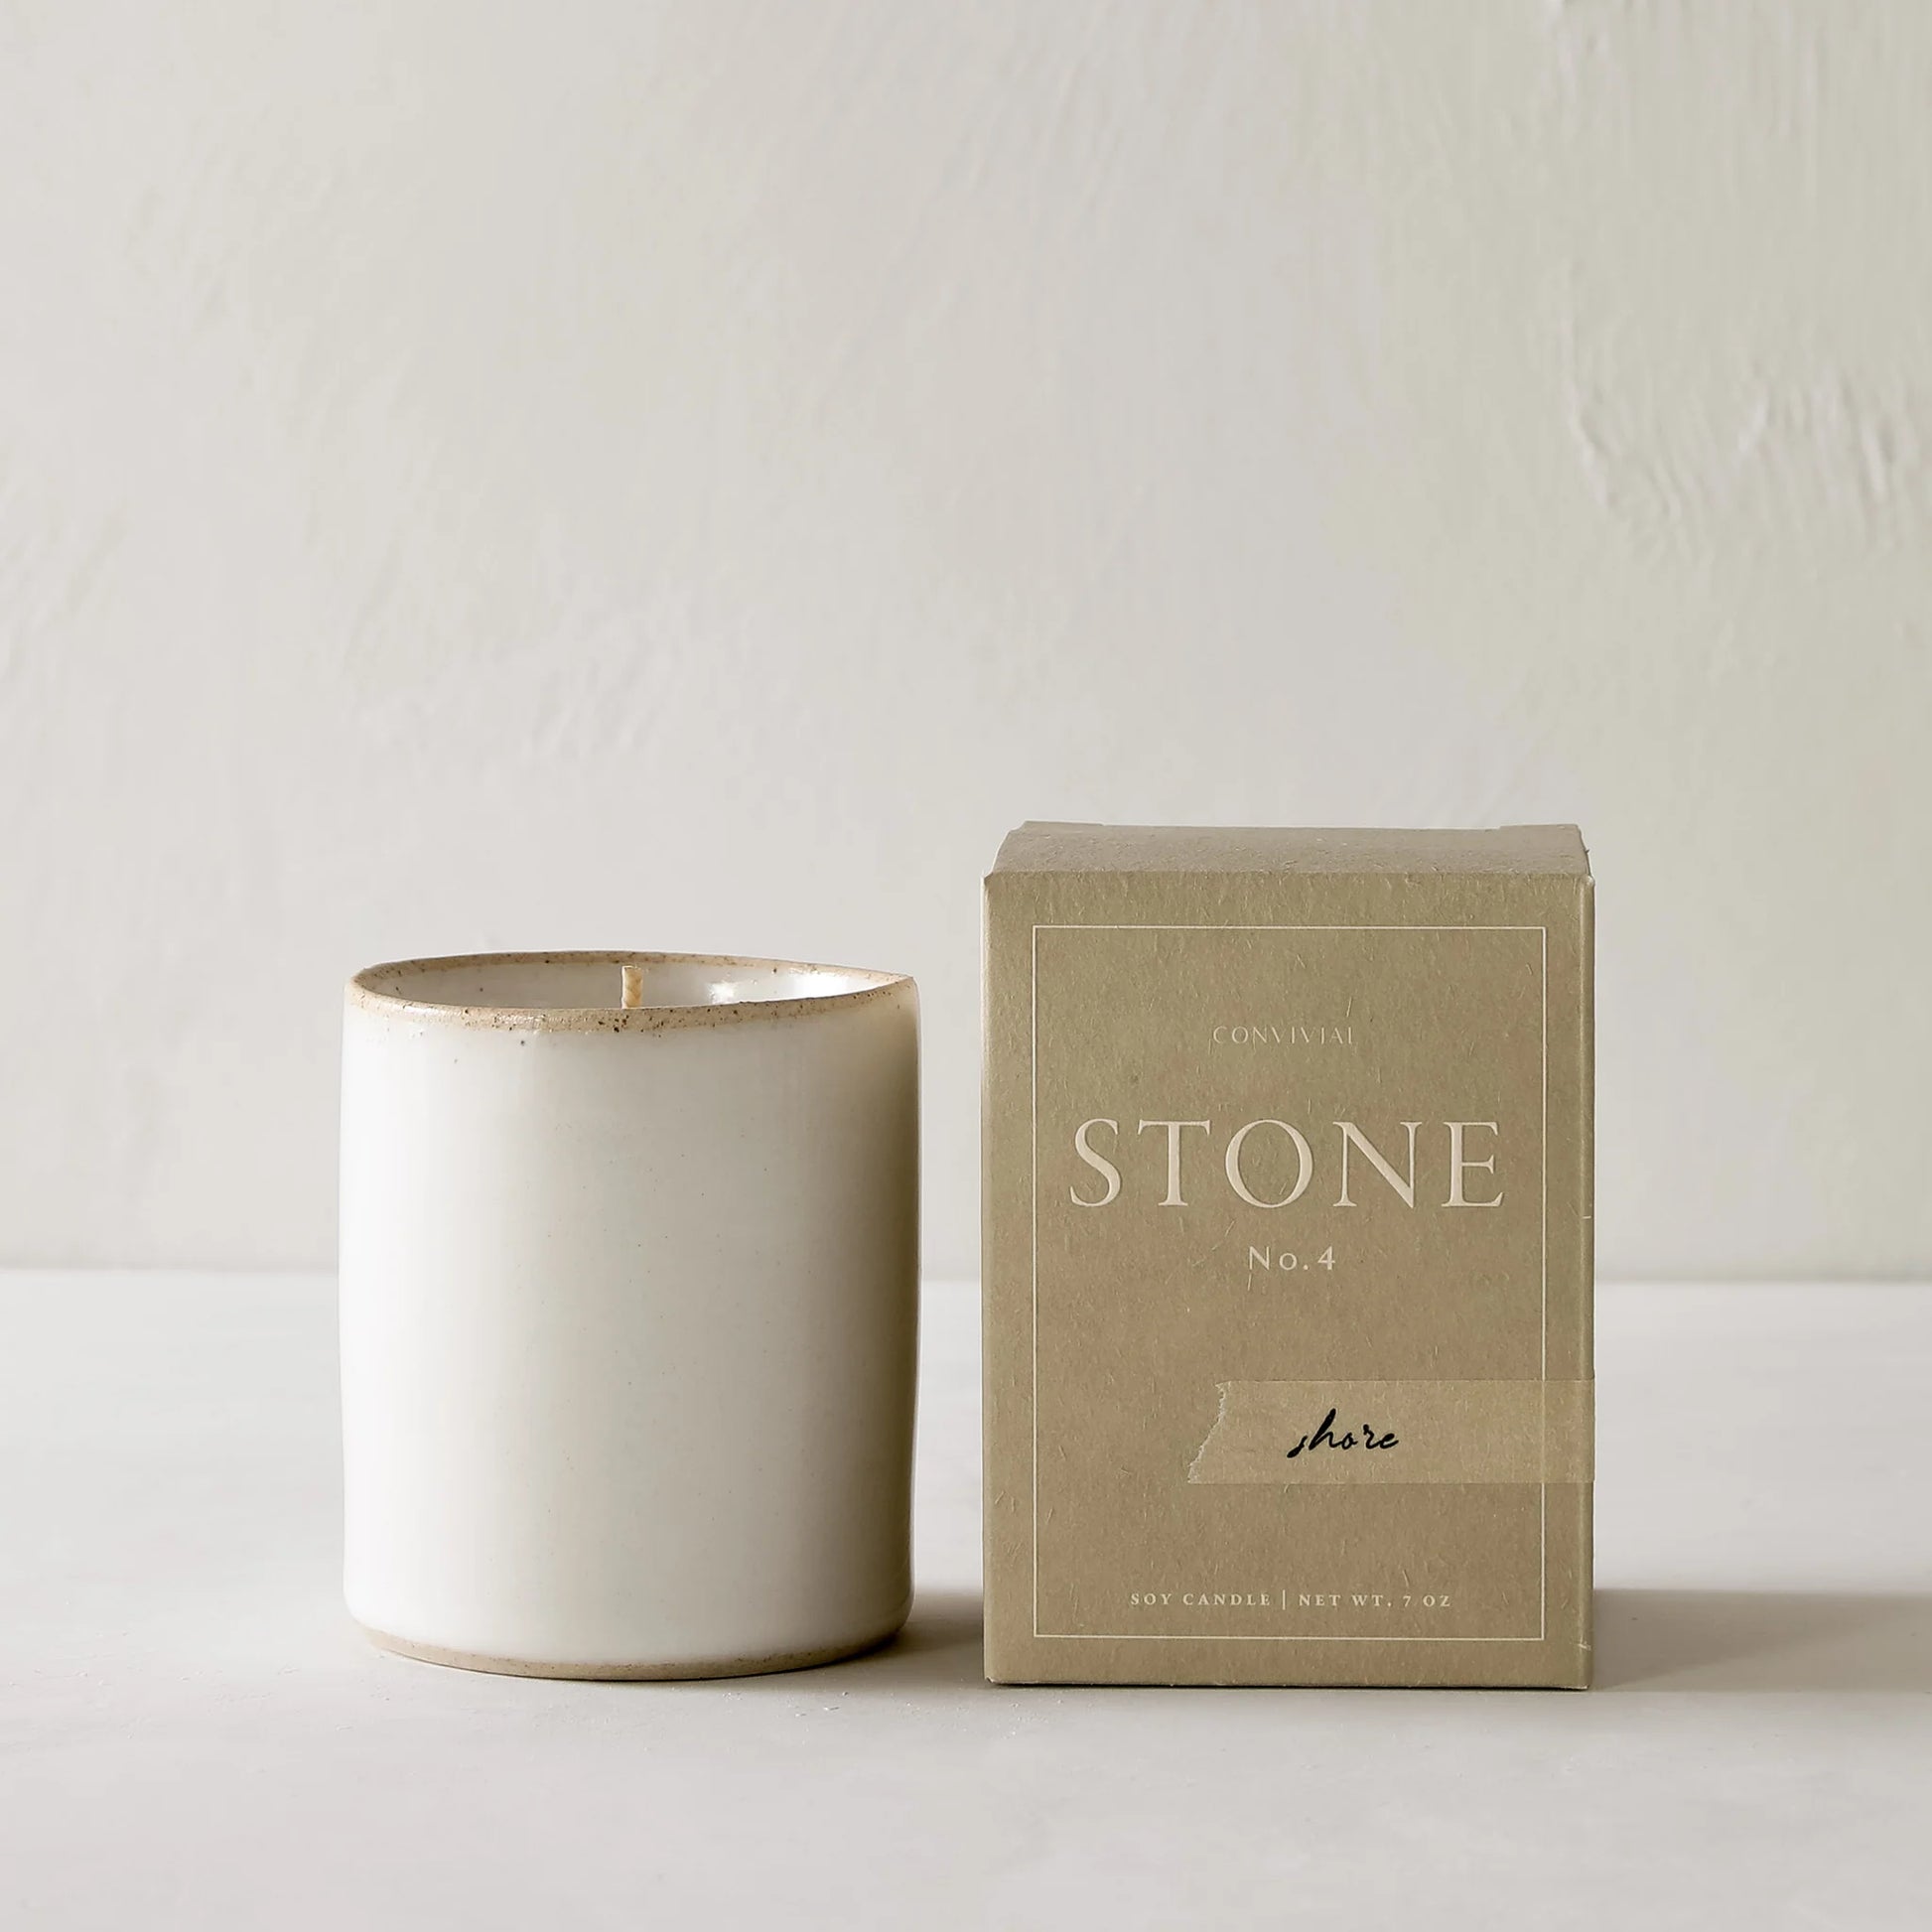 Stone No. 4 Shore Scented Soy Candle